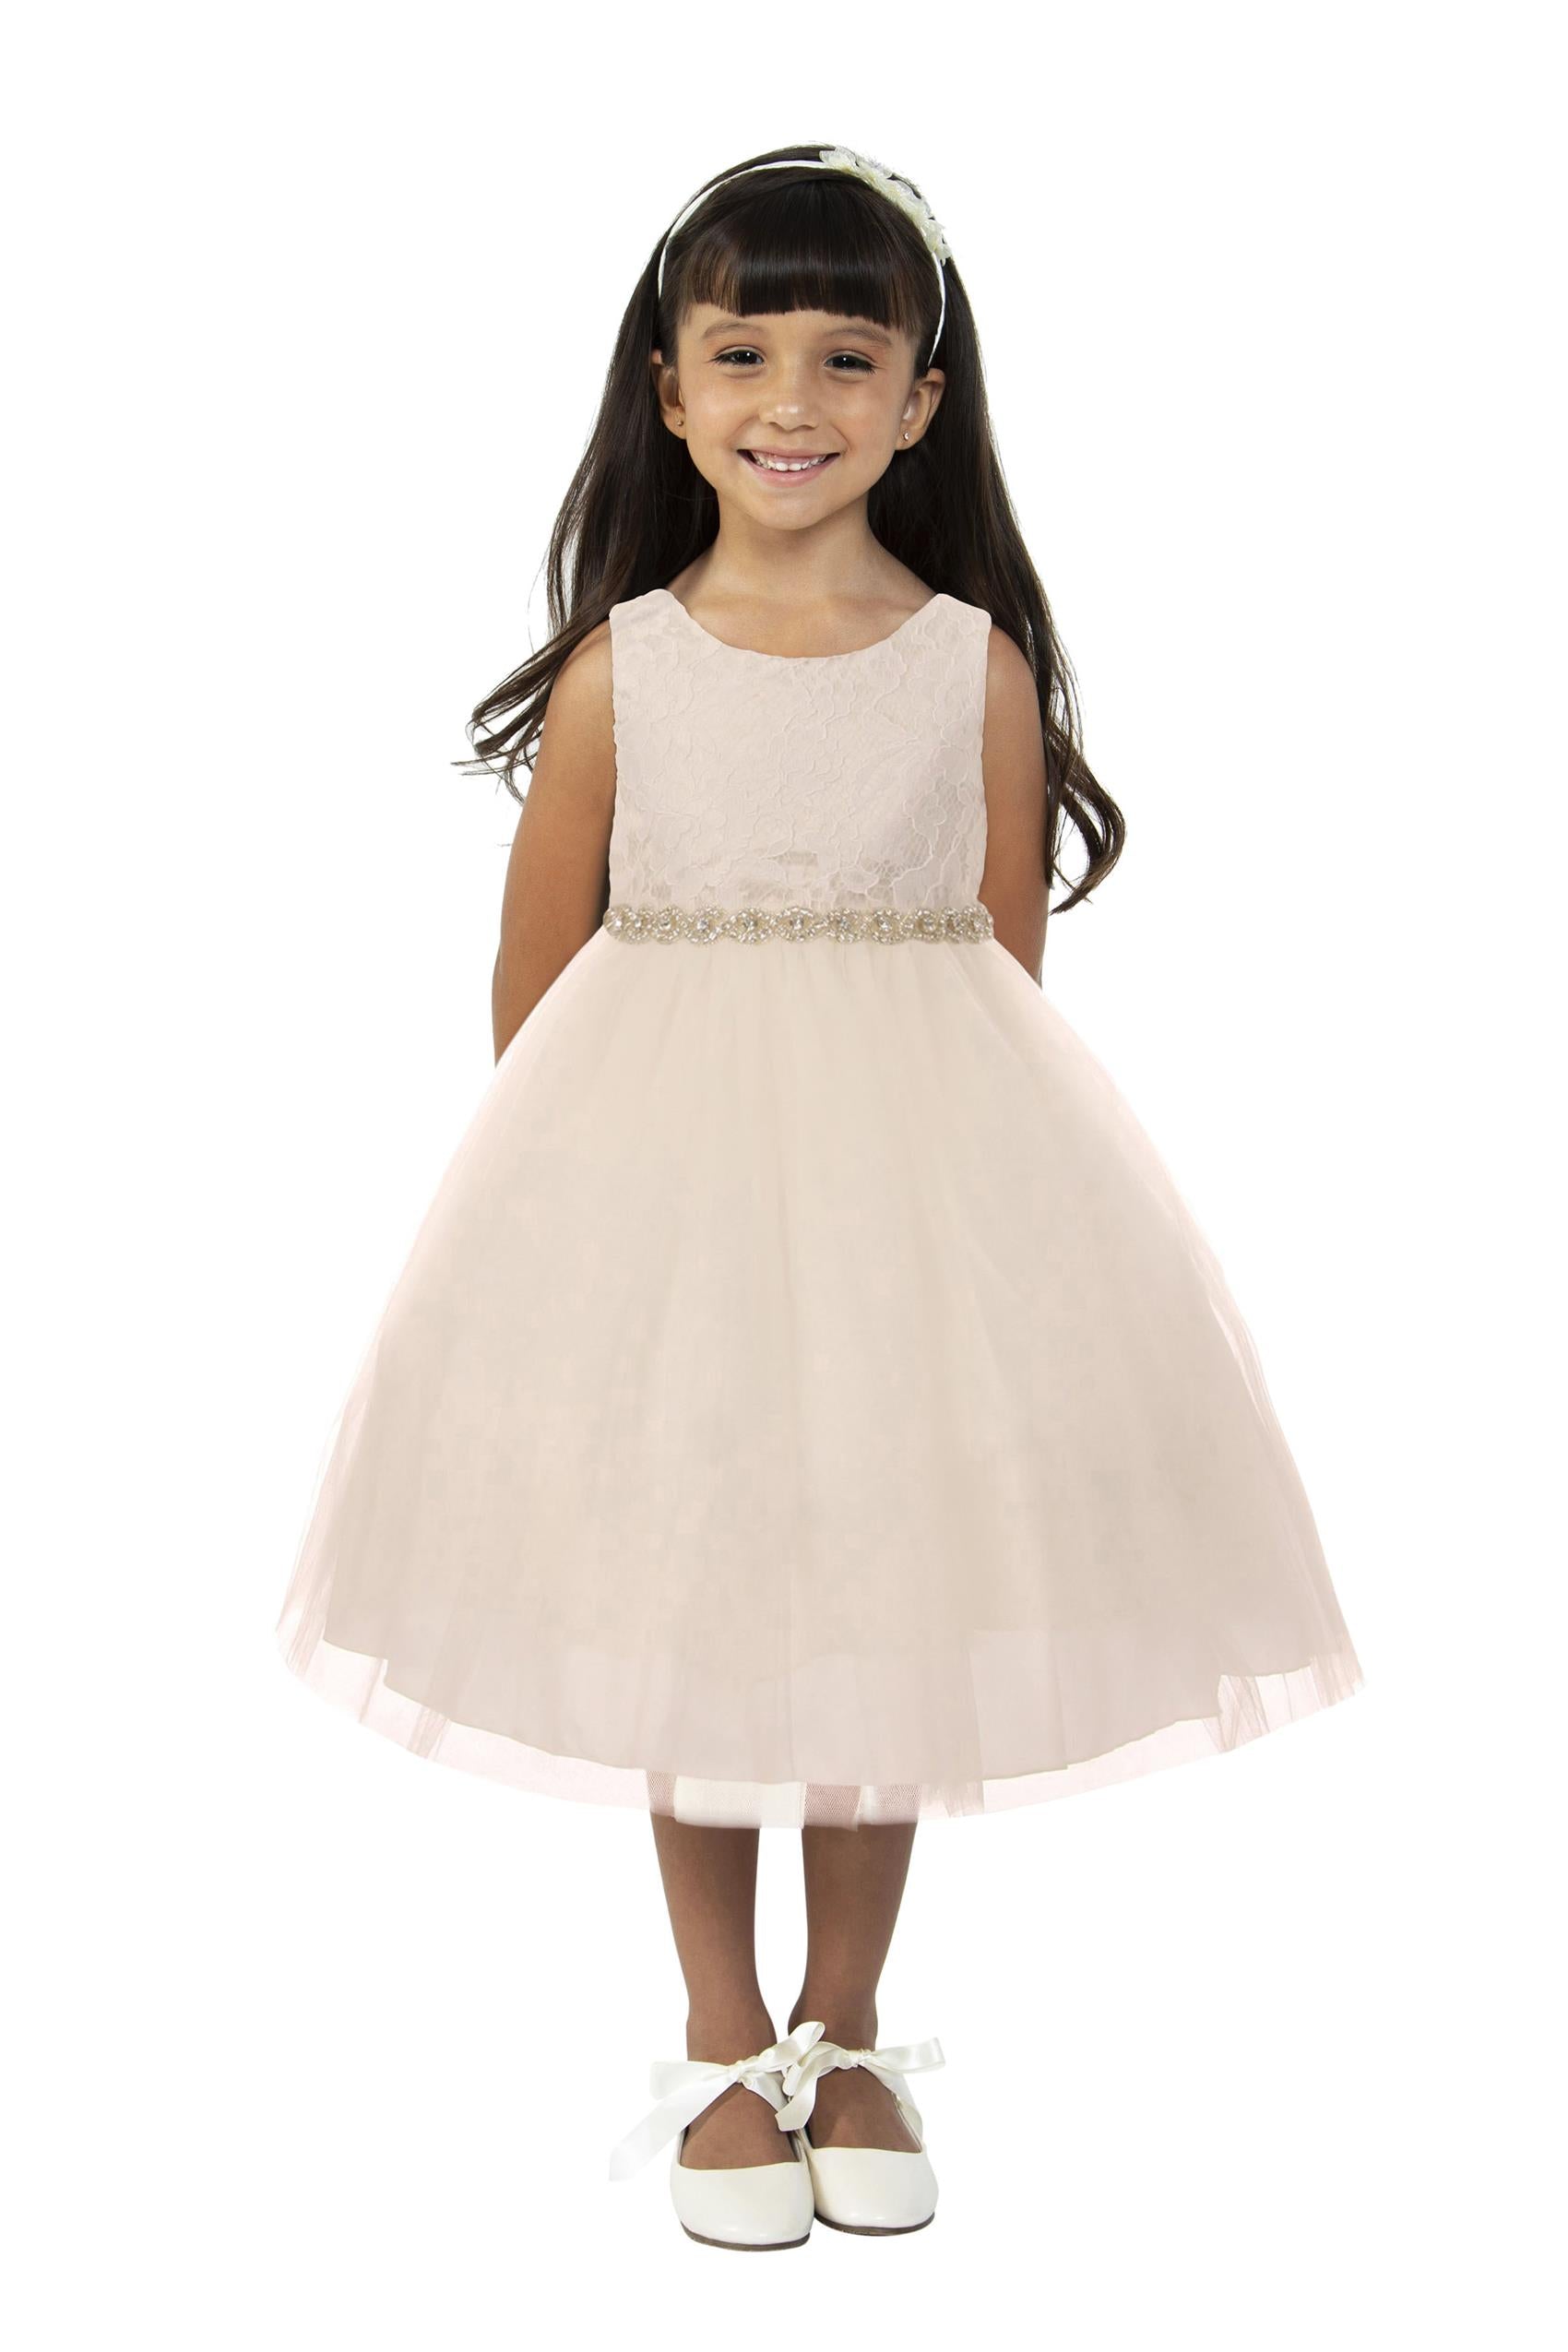 Baby Lace & Love Girls Formal Dress